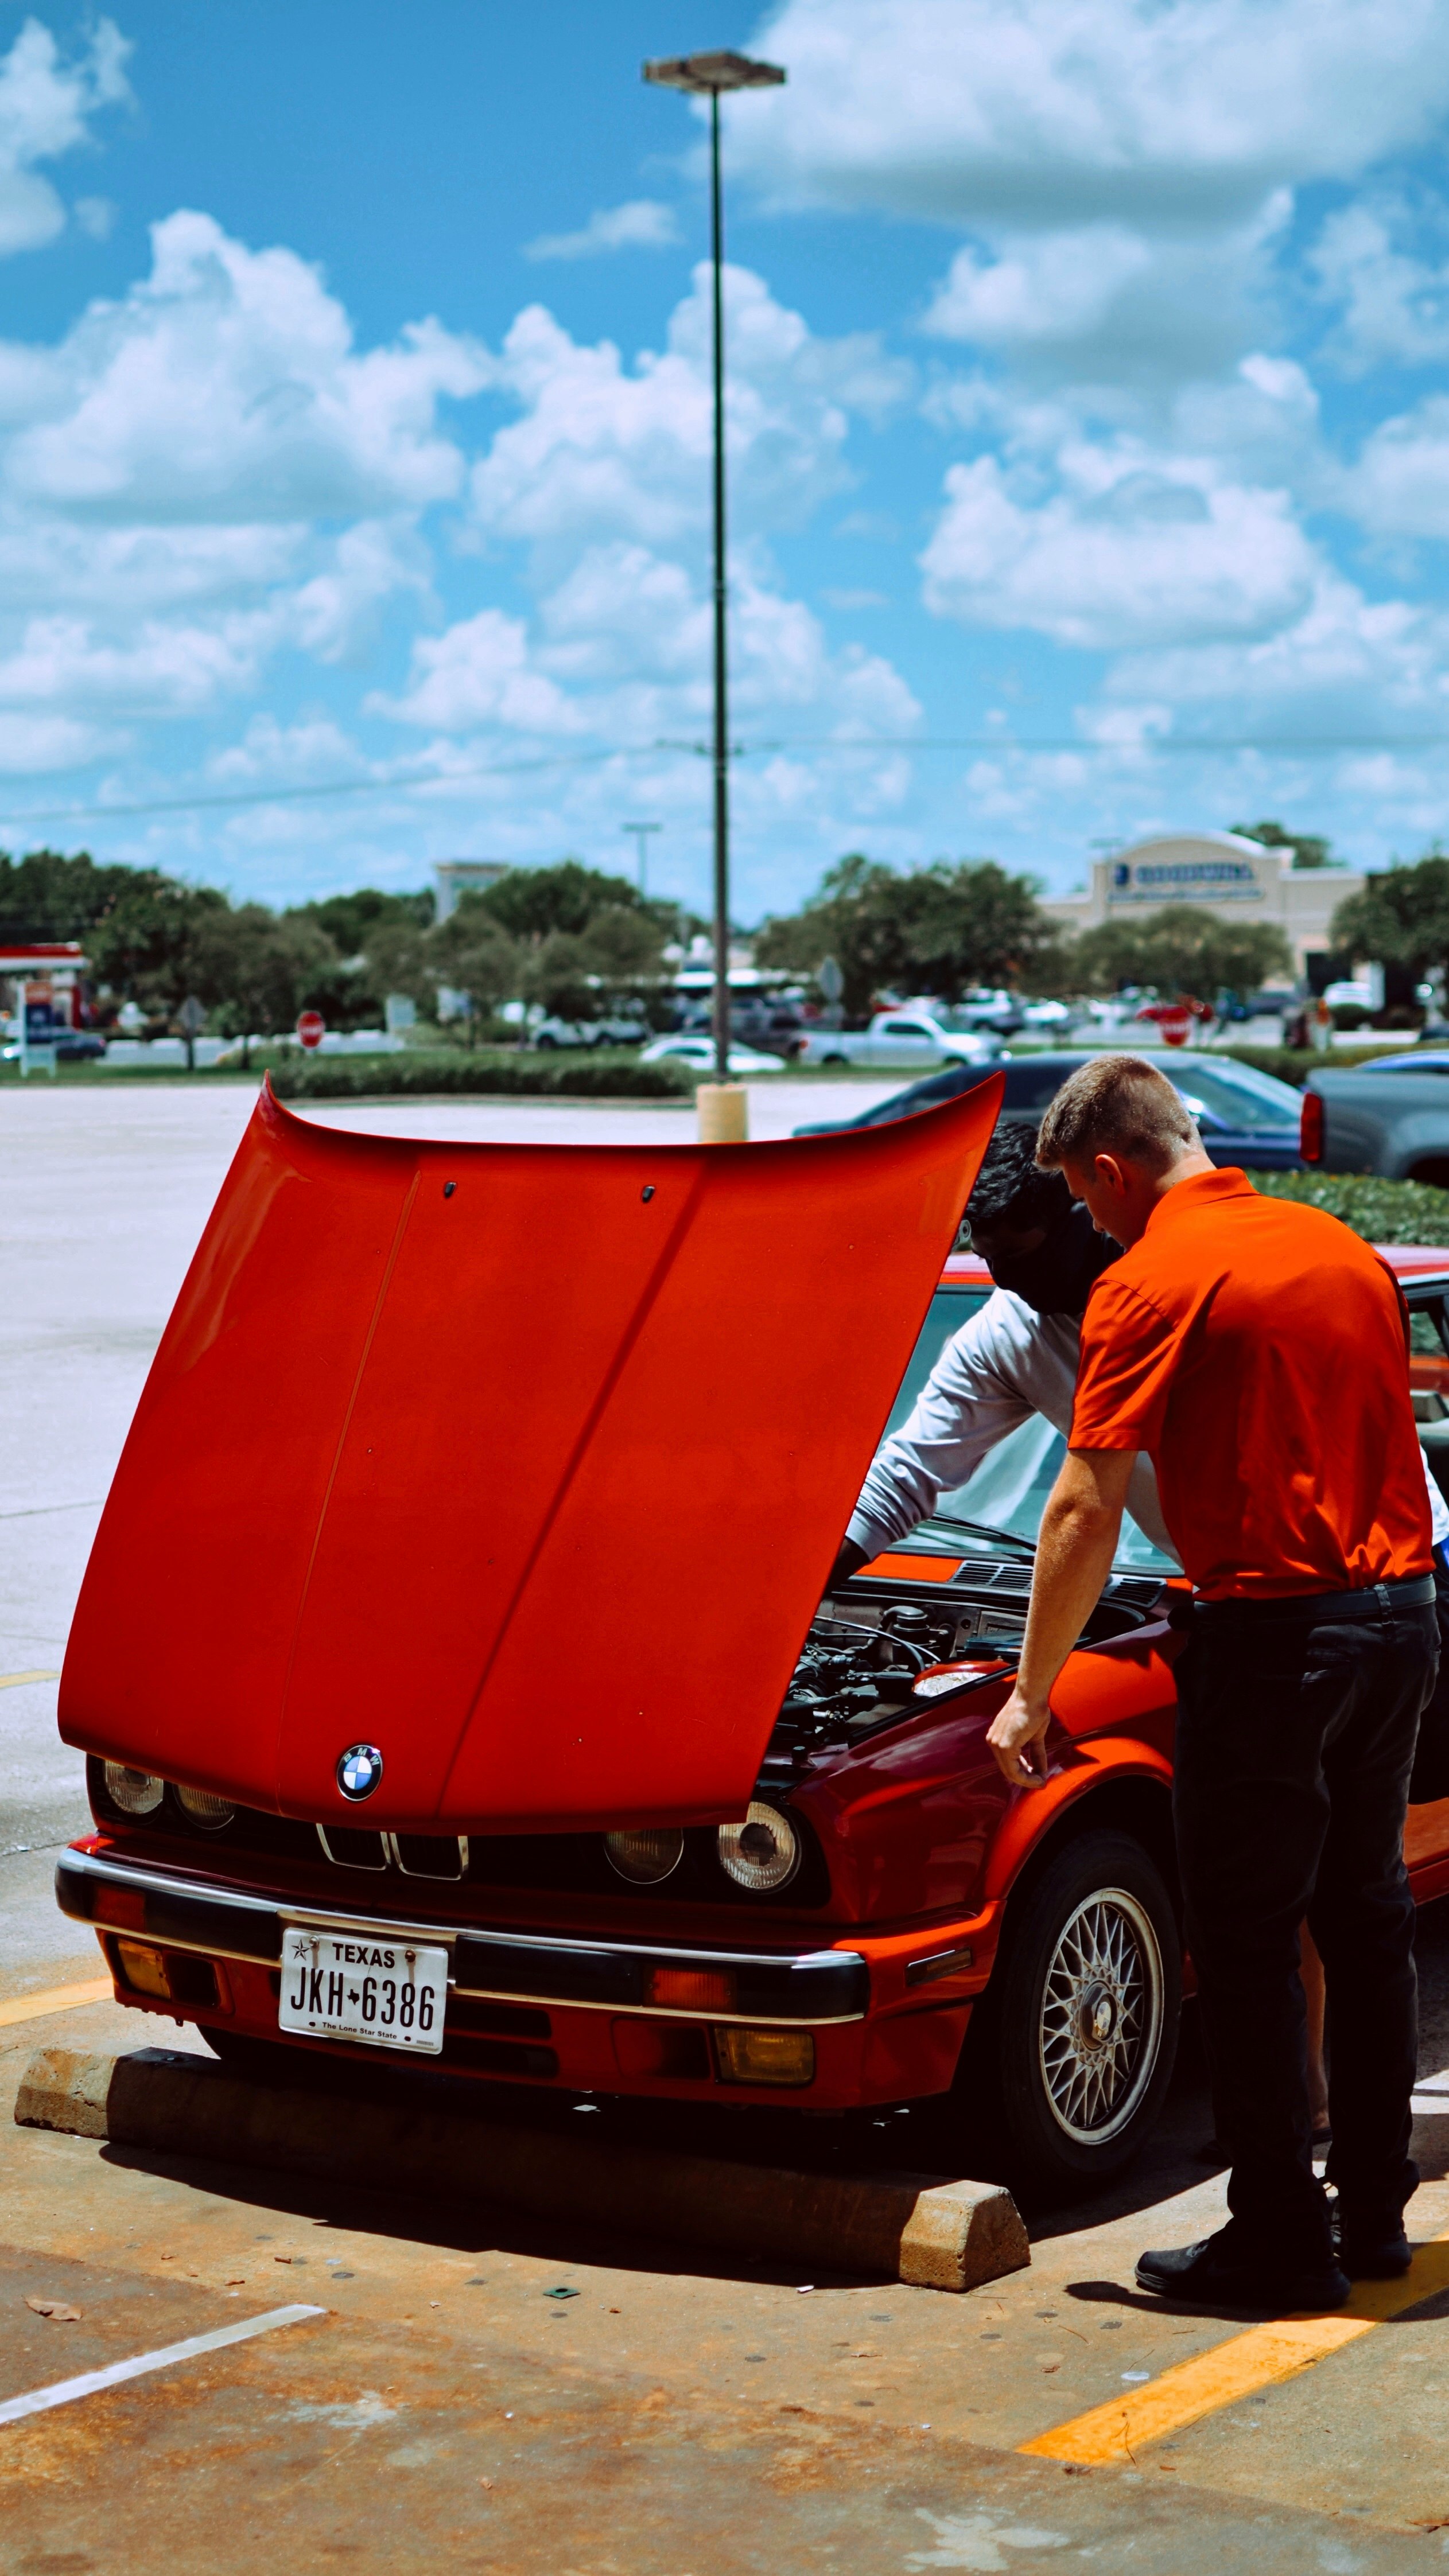 man in blue shirt standing beside red car during daytime